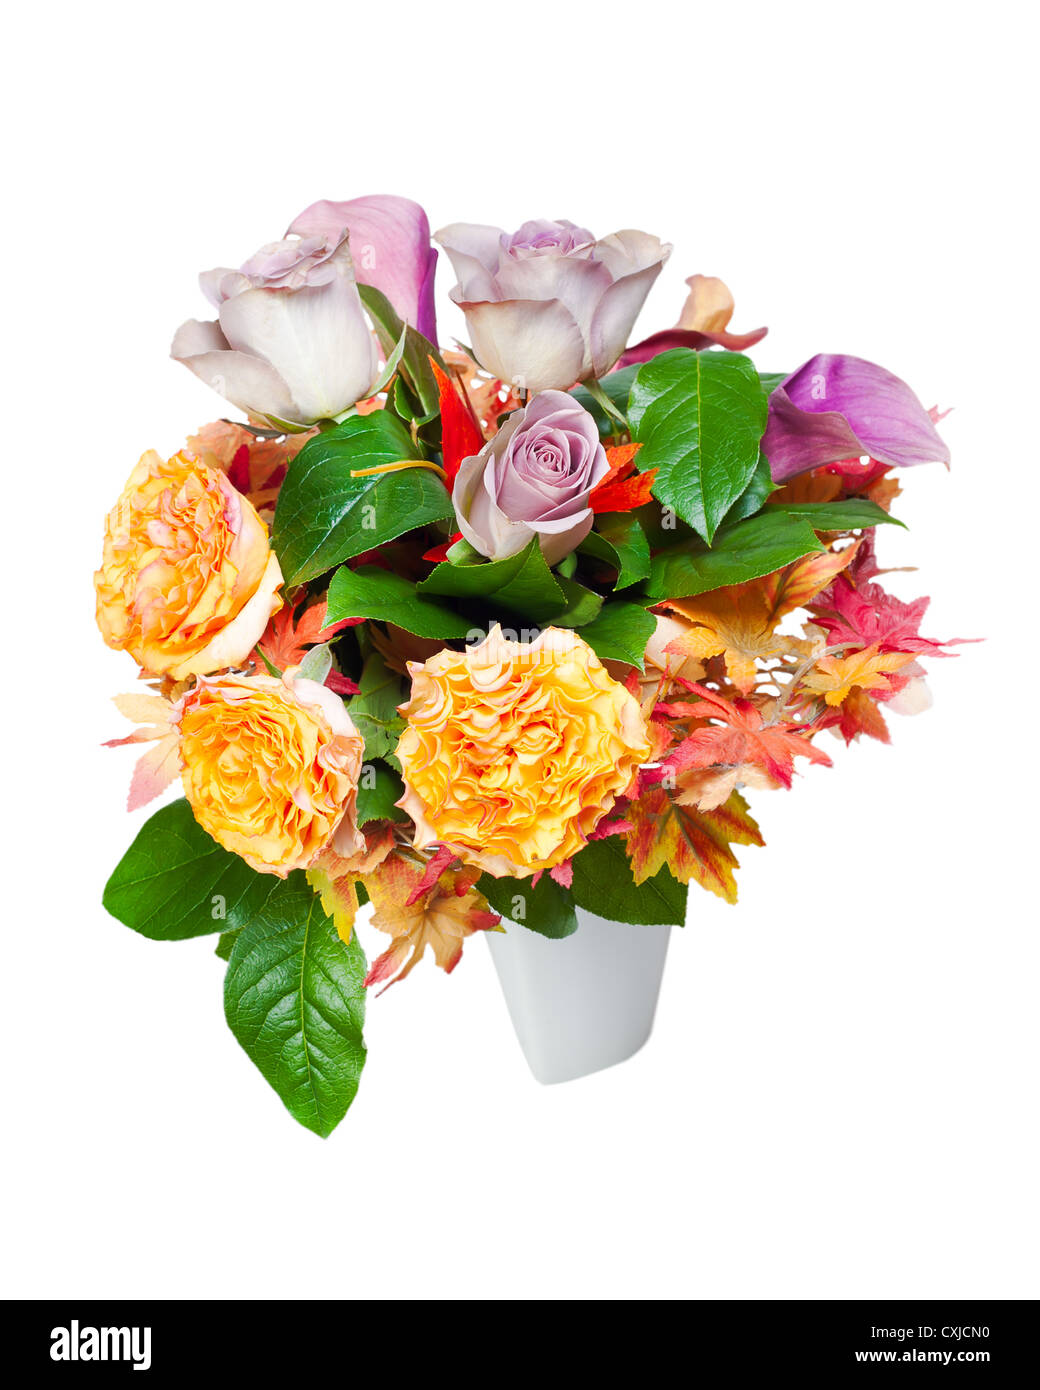 colorful autumn flower bouquet arrangement centerpiece in vase isolated on white background Stock Photo